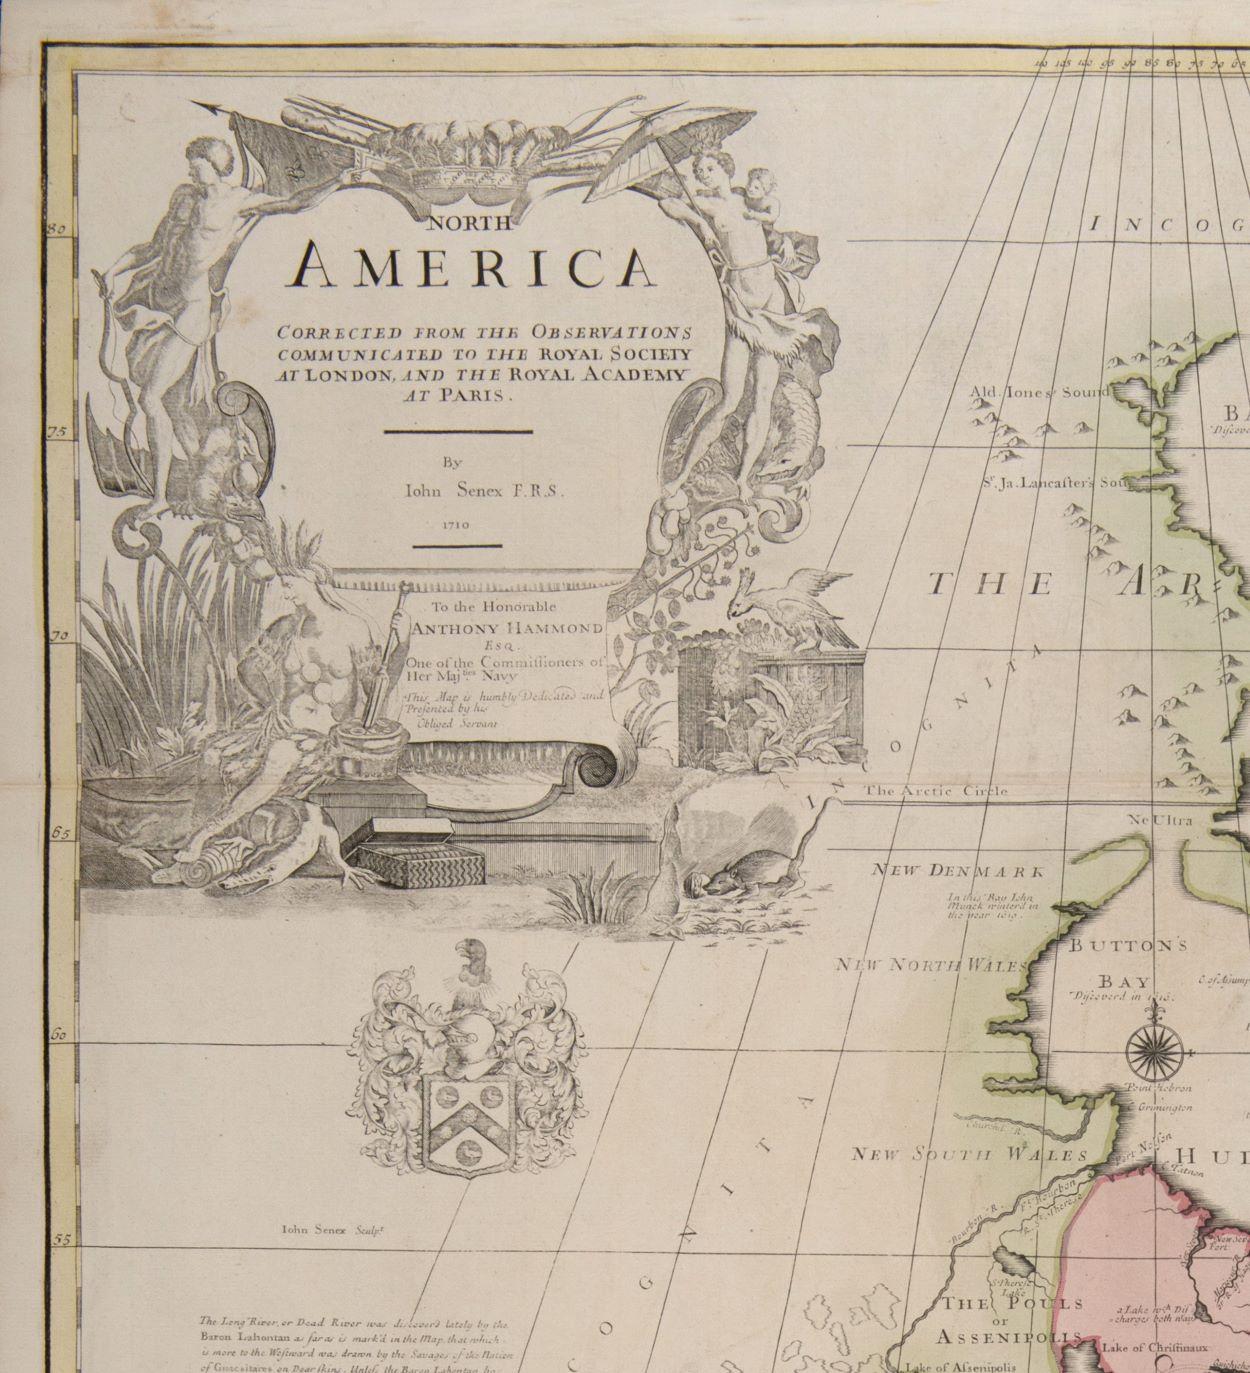 one of the earliest large-scale English maps of North America - Naturalistic Art by John Senex